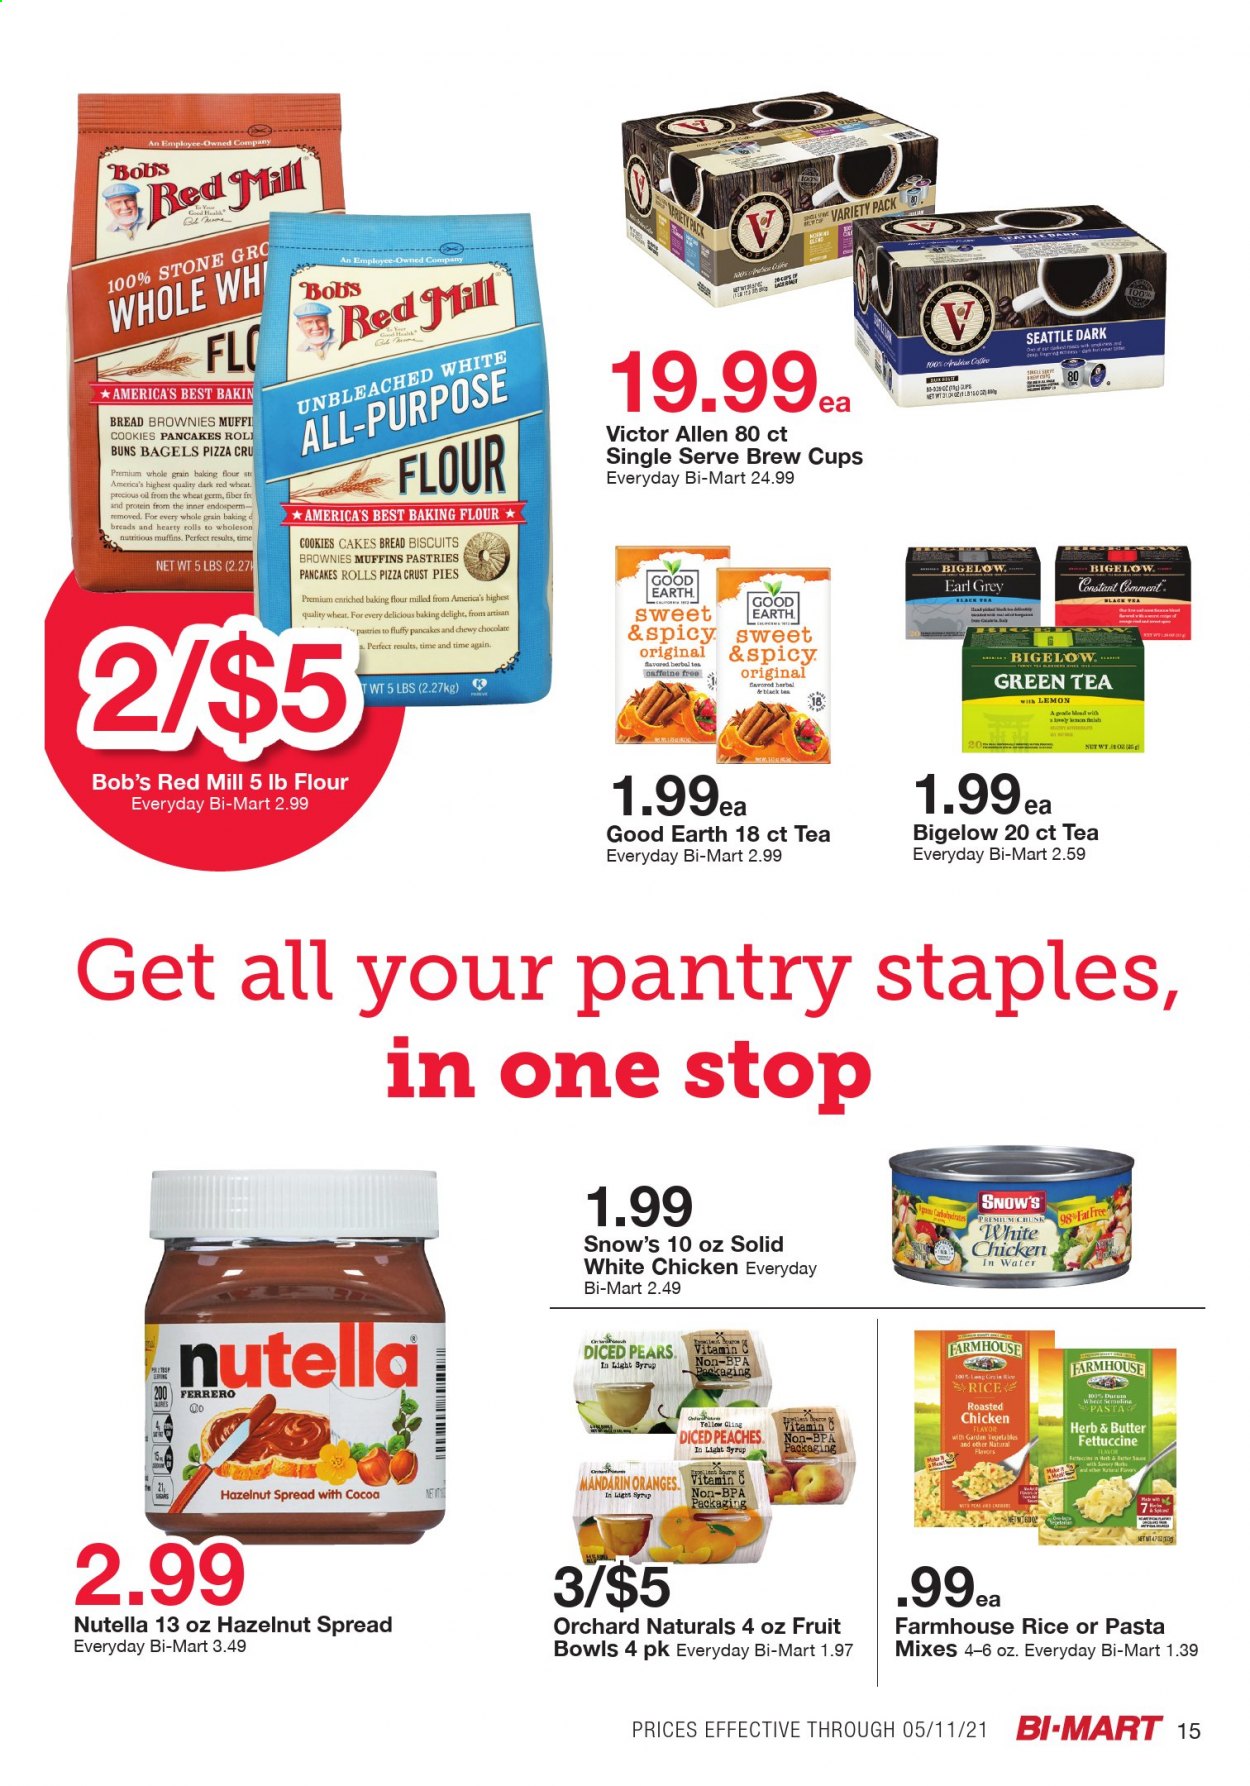 thumbnail - Bi-Mart Flyer - 04/27/2021 - 05/11/2021 - Sales products - Lack, bed, bagels, bread, white bread, cake, buns, brownies, muffin, mandarines, pears, oranges, pizza, chicken roast, sauce, pancakes, butter, cookies, Nutella, chocolate, Ferrero Rocher, biscuit, flour, wheat germ, long grain rice, herbs, oil, syrup, hazelnut spread, green tea, tea, cup, Victor, vitamin c. Page 15.